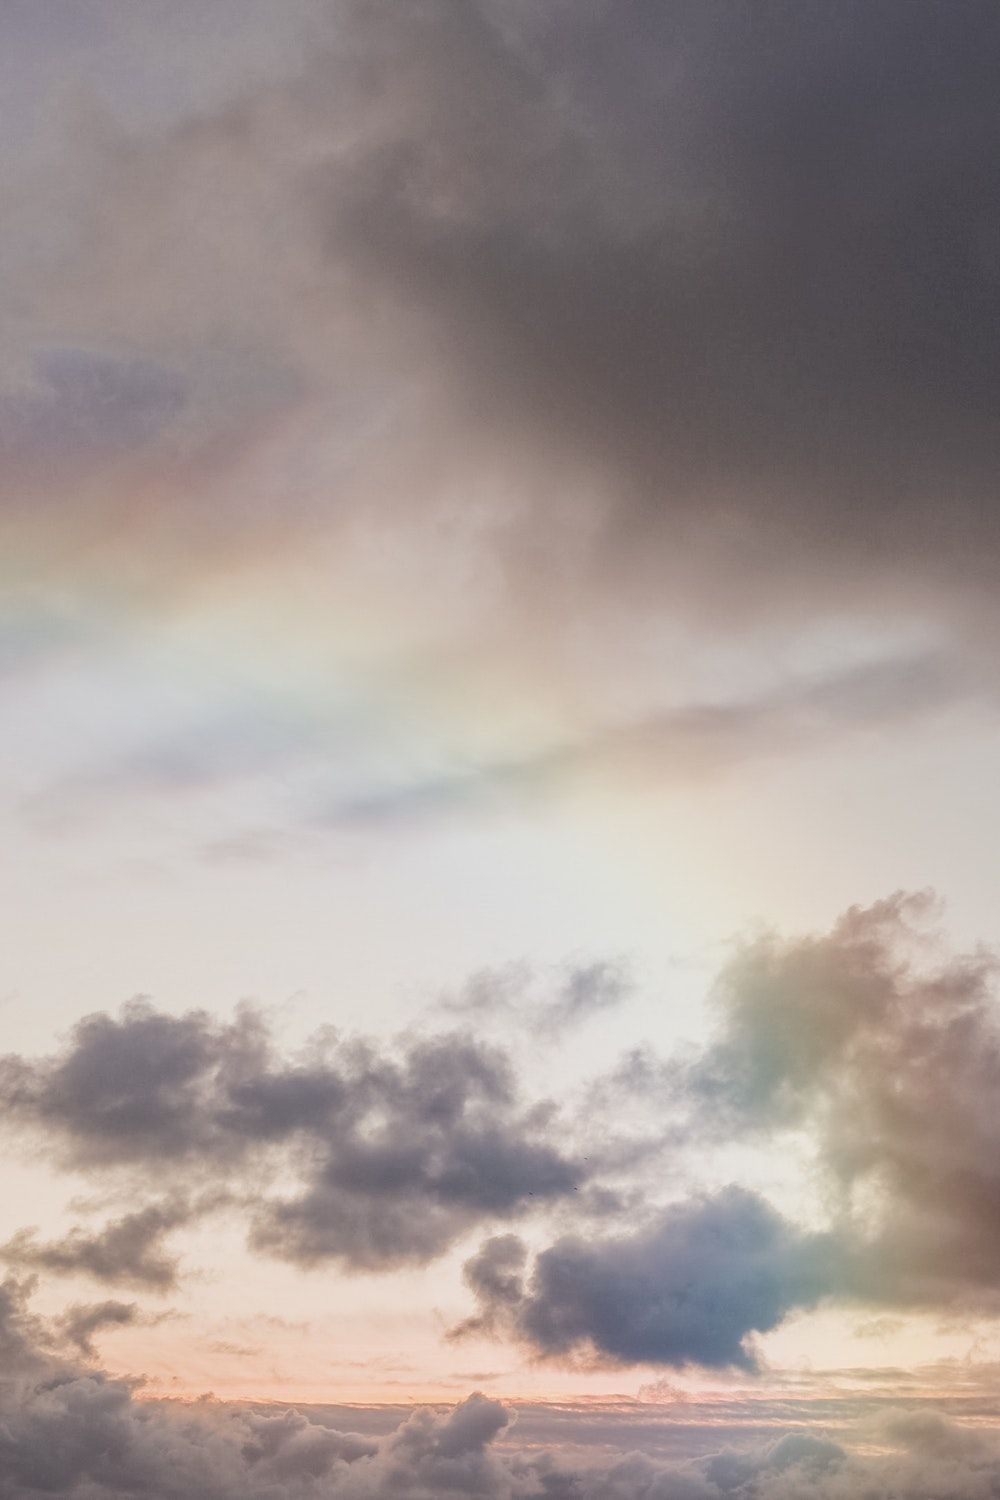 A rainbow appears in the sky above the clouds. - Pastel rainbow